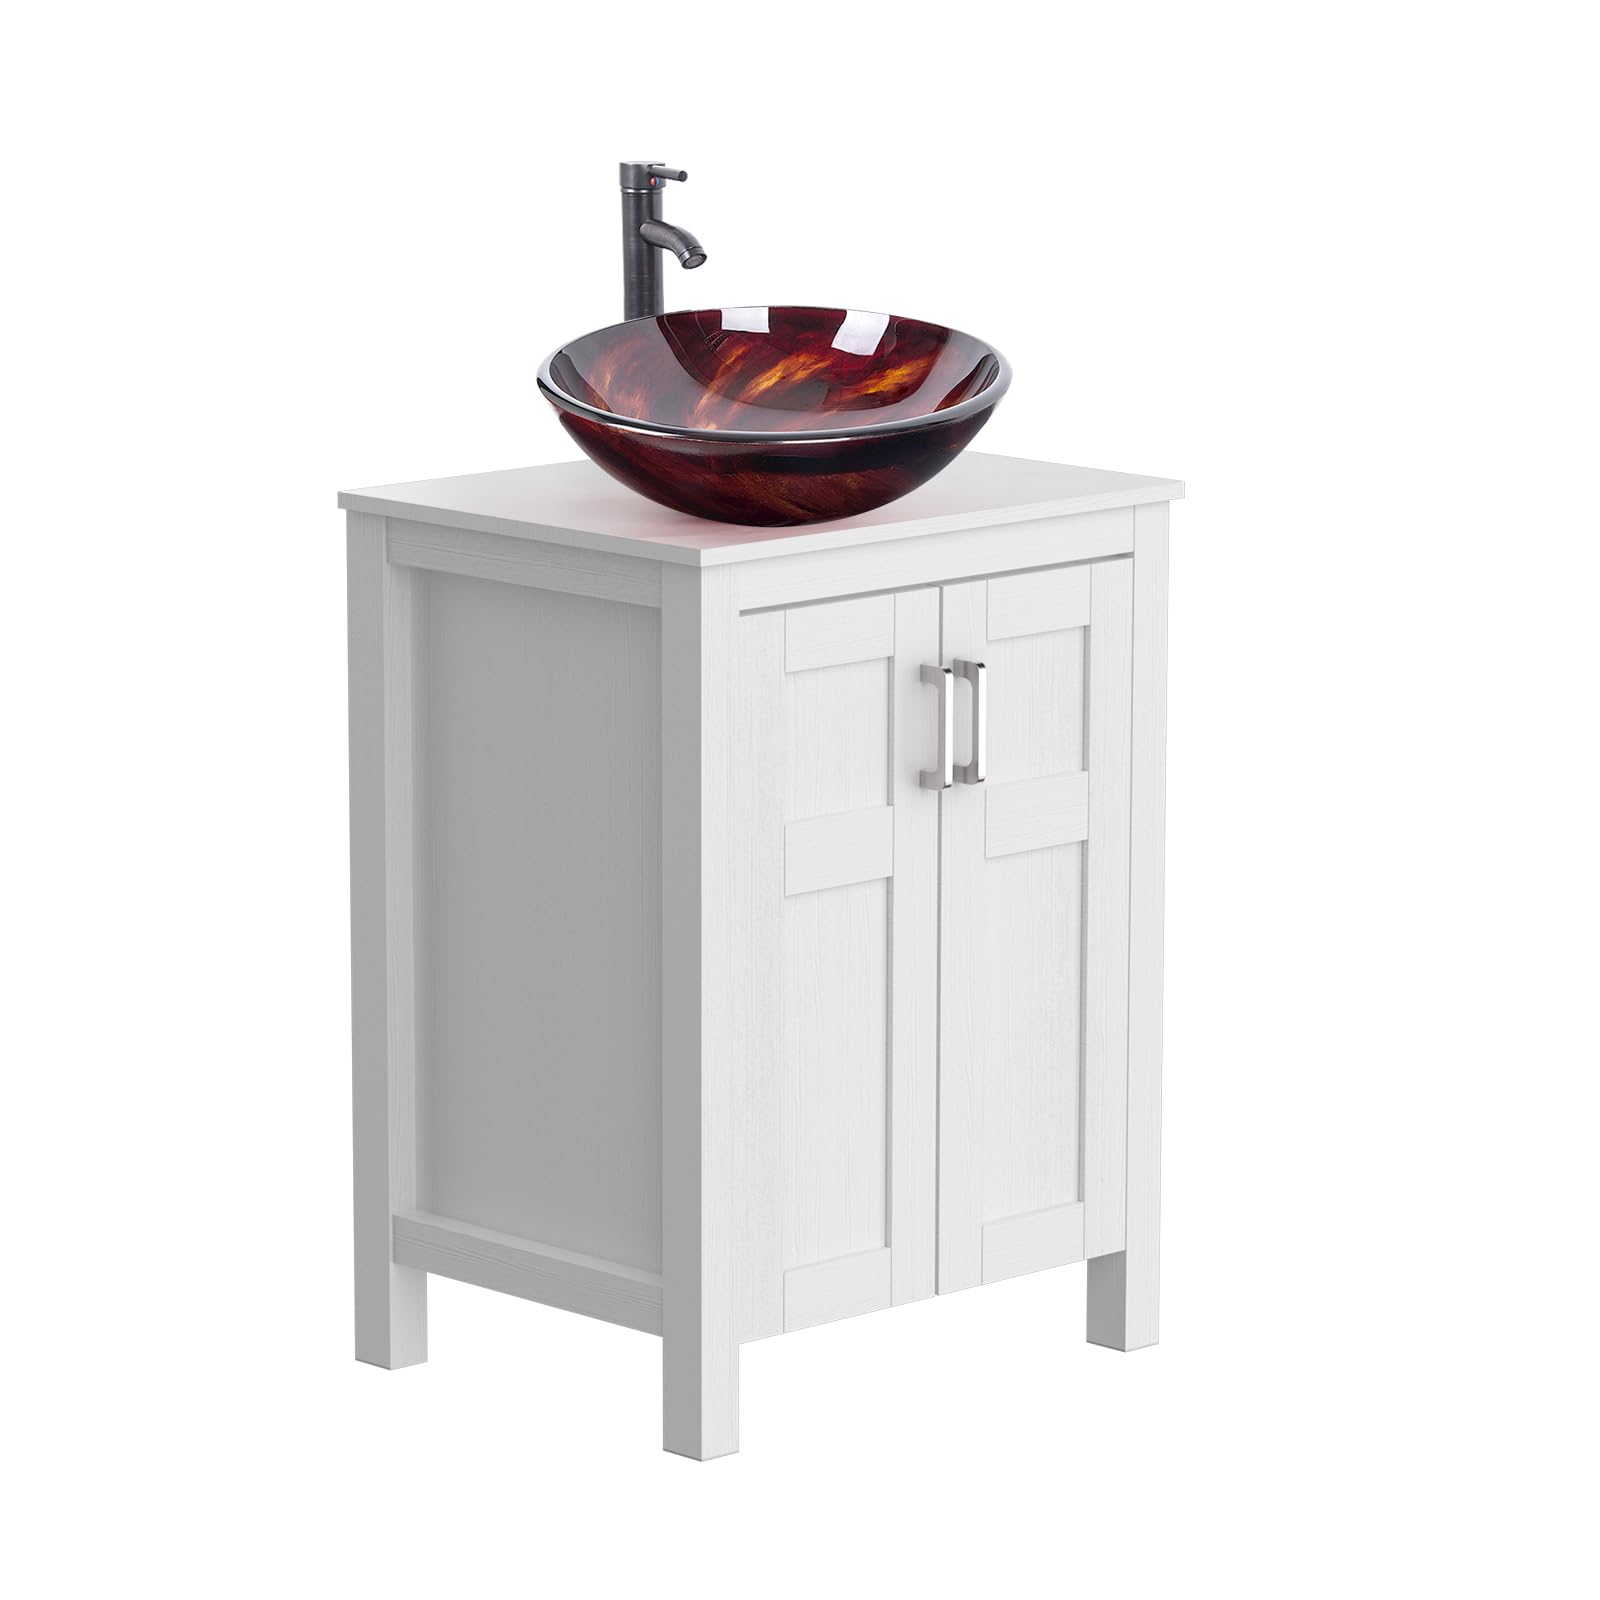 Side view of Elecwish White Bathroom Vanity and Flame Red Sink Set HW1120-WH